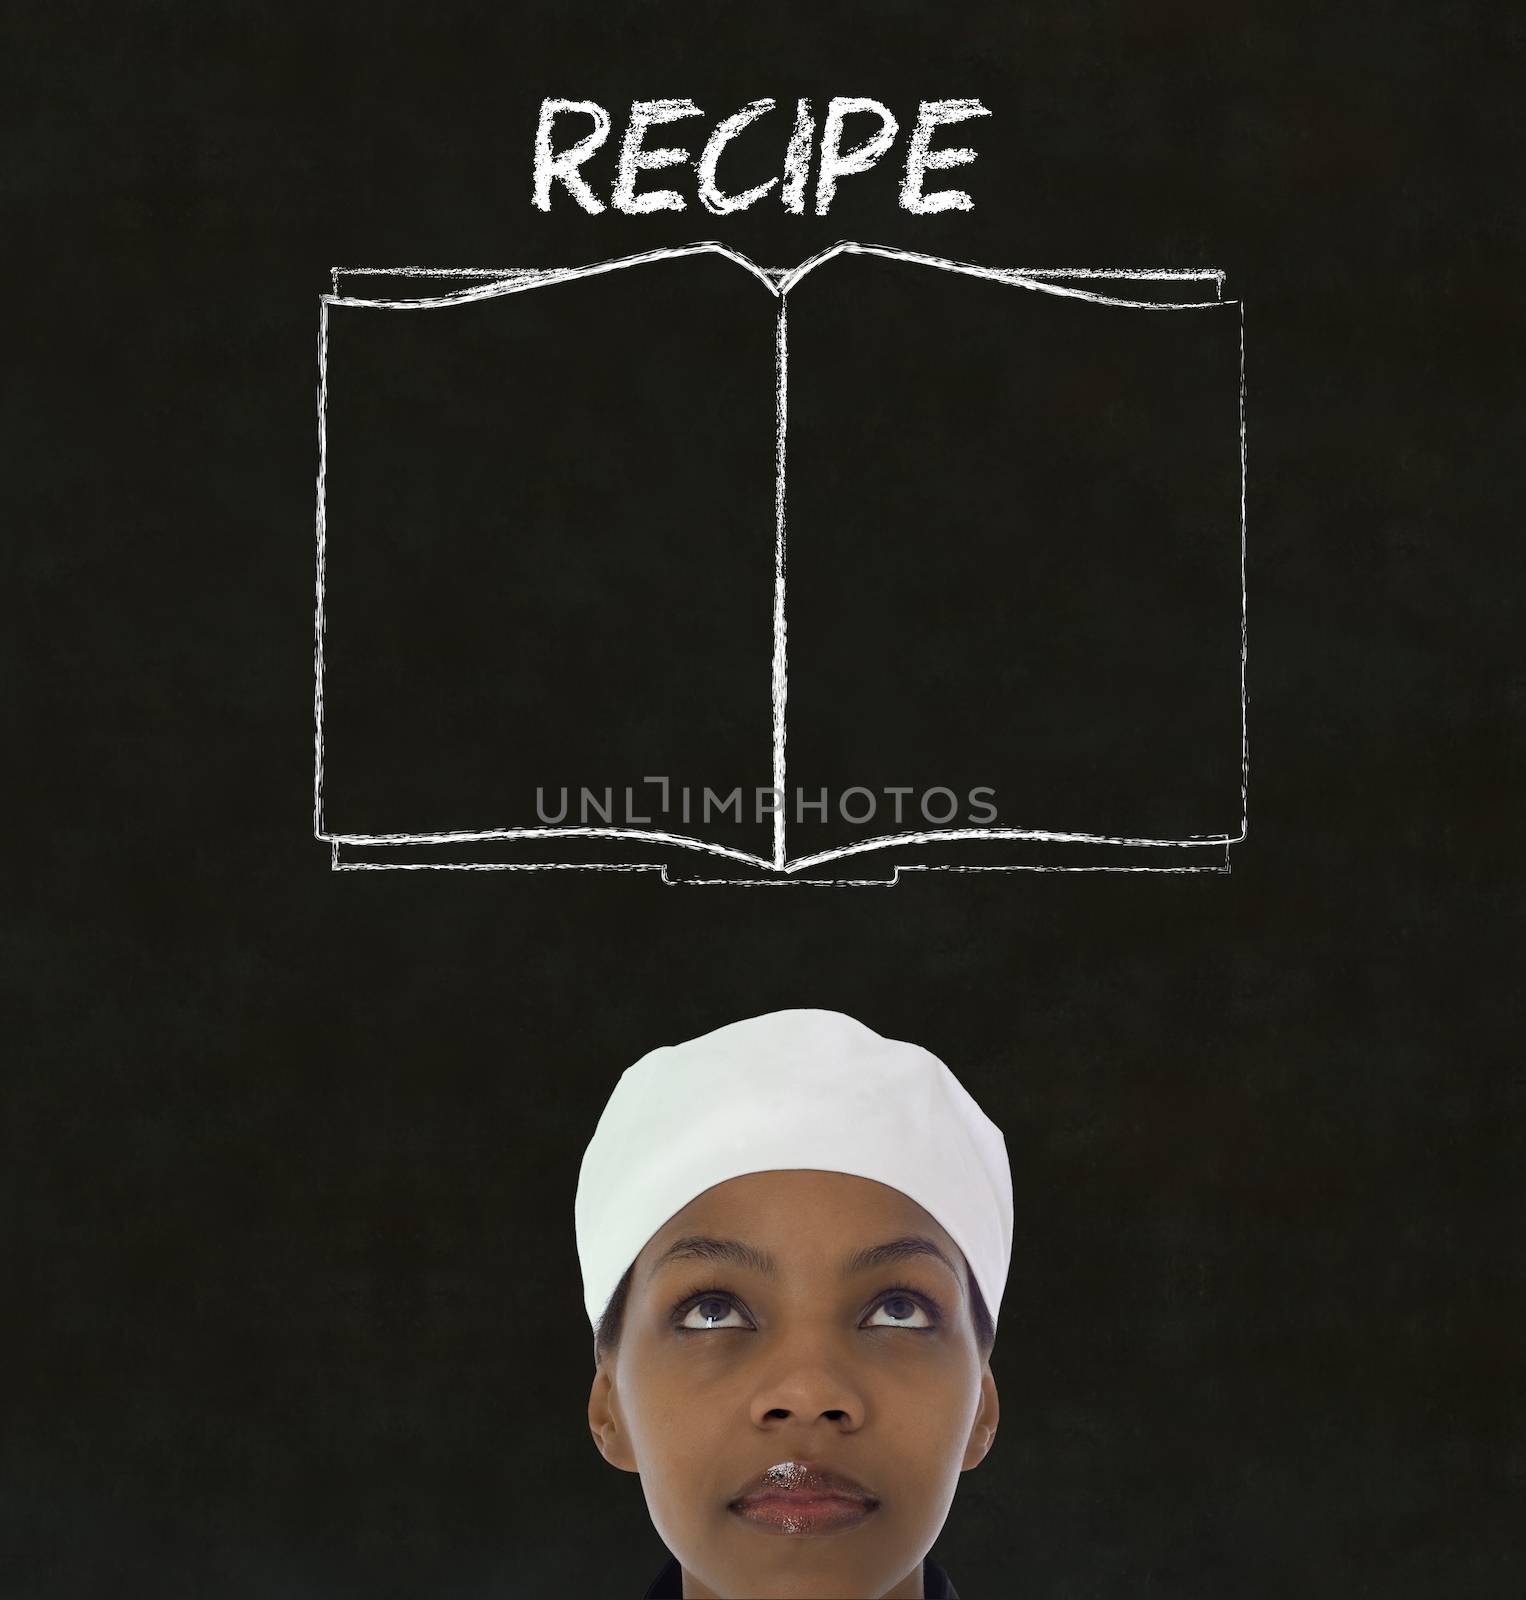 Chef with recipe book on chalk blackboard menu background by alistaircotton